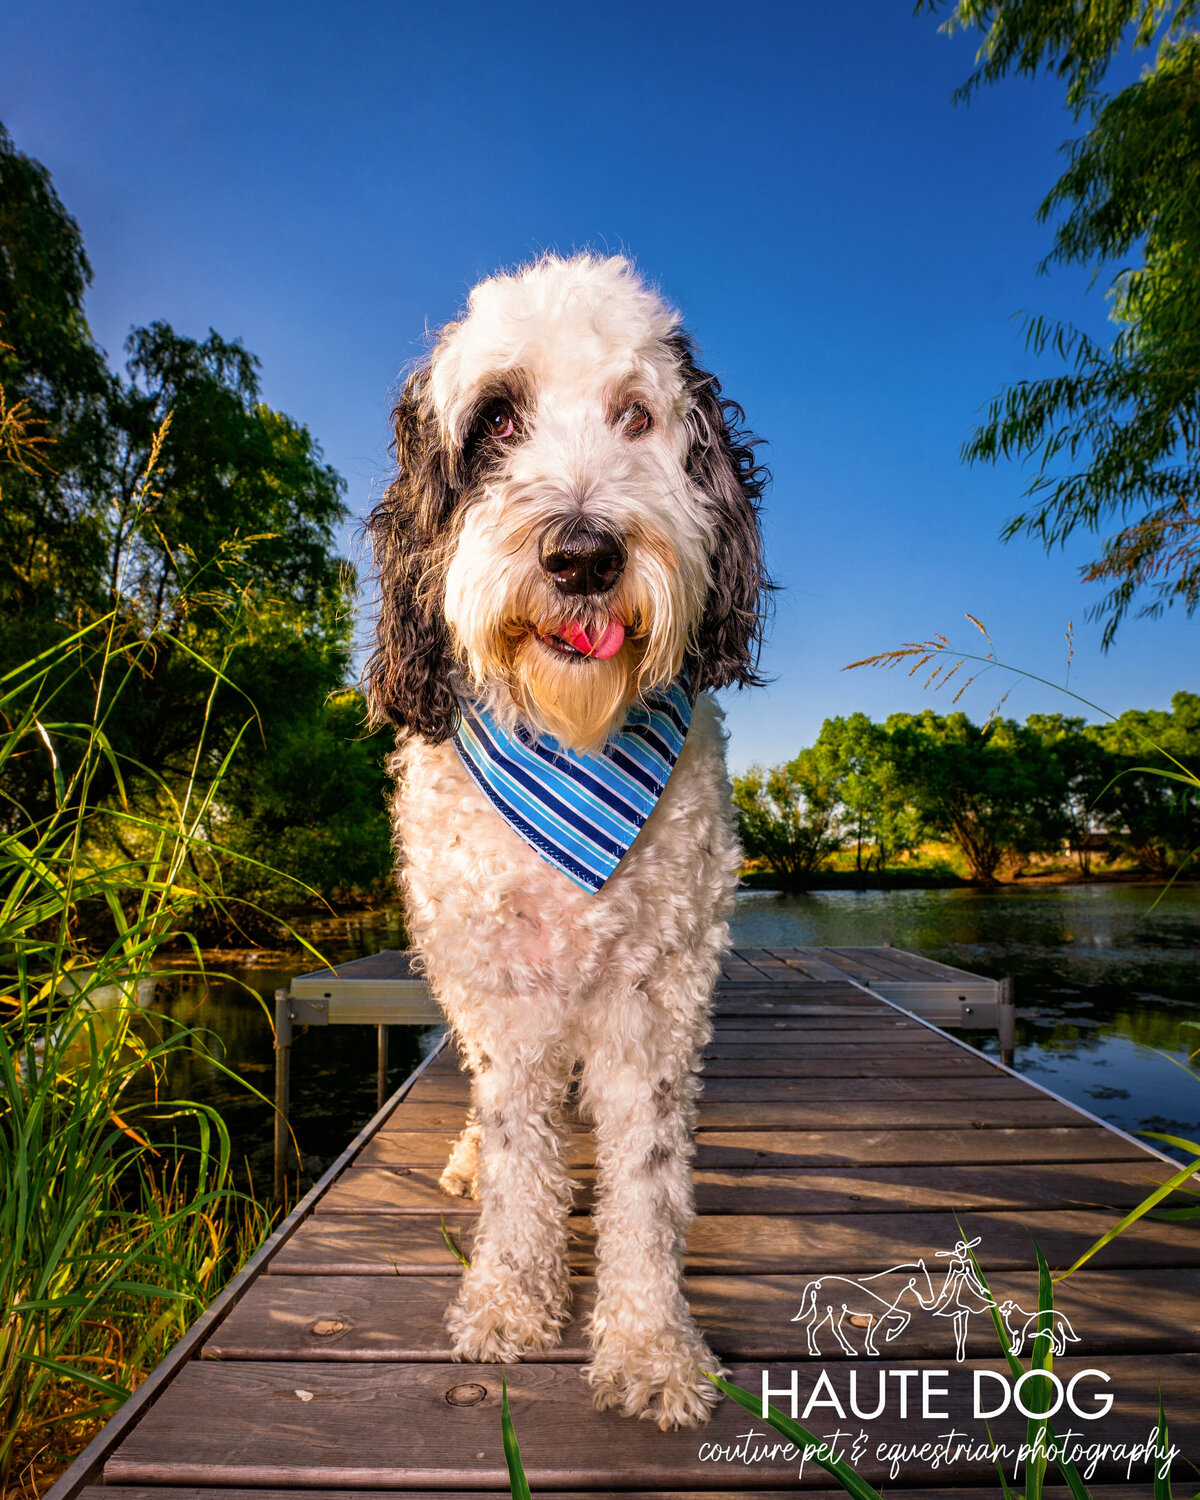 A shaggy black and white doodle dog wearing a blue bandana sticks his tongue out while standing on a wood dock surrounded by trees.